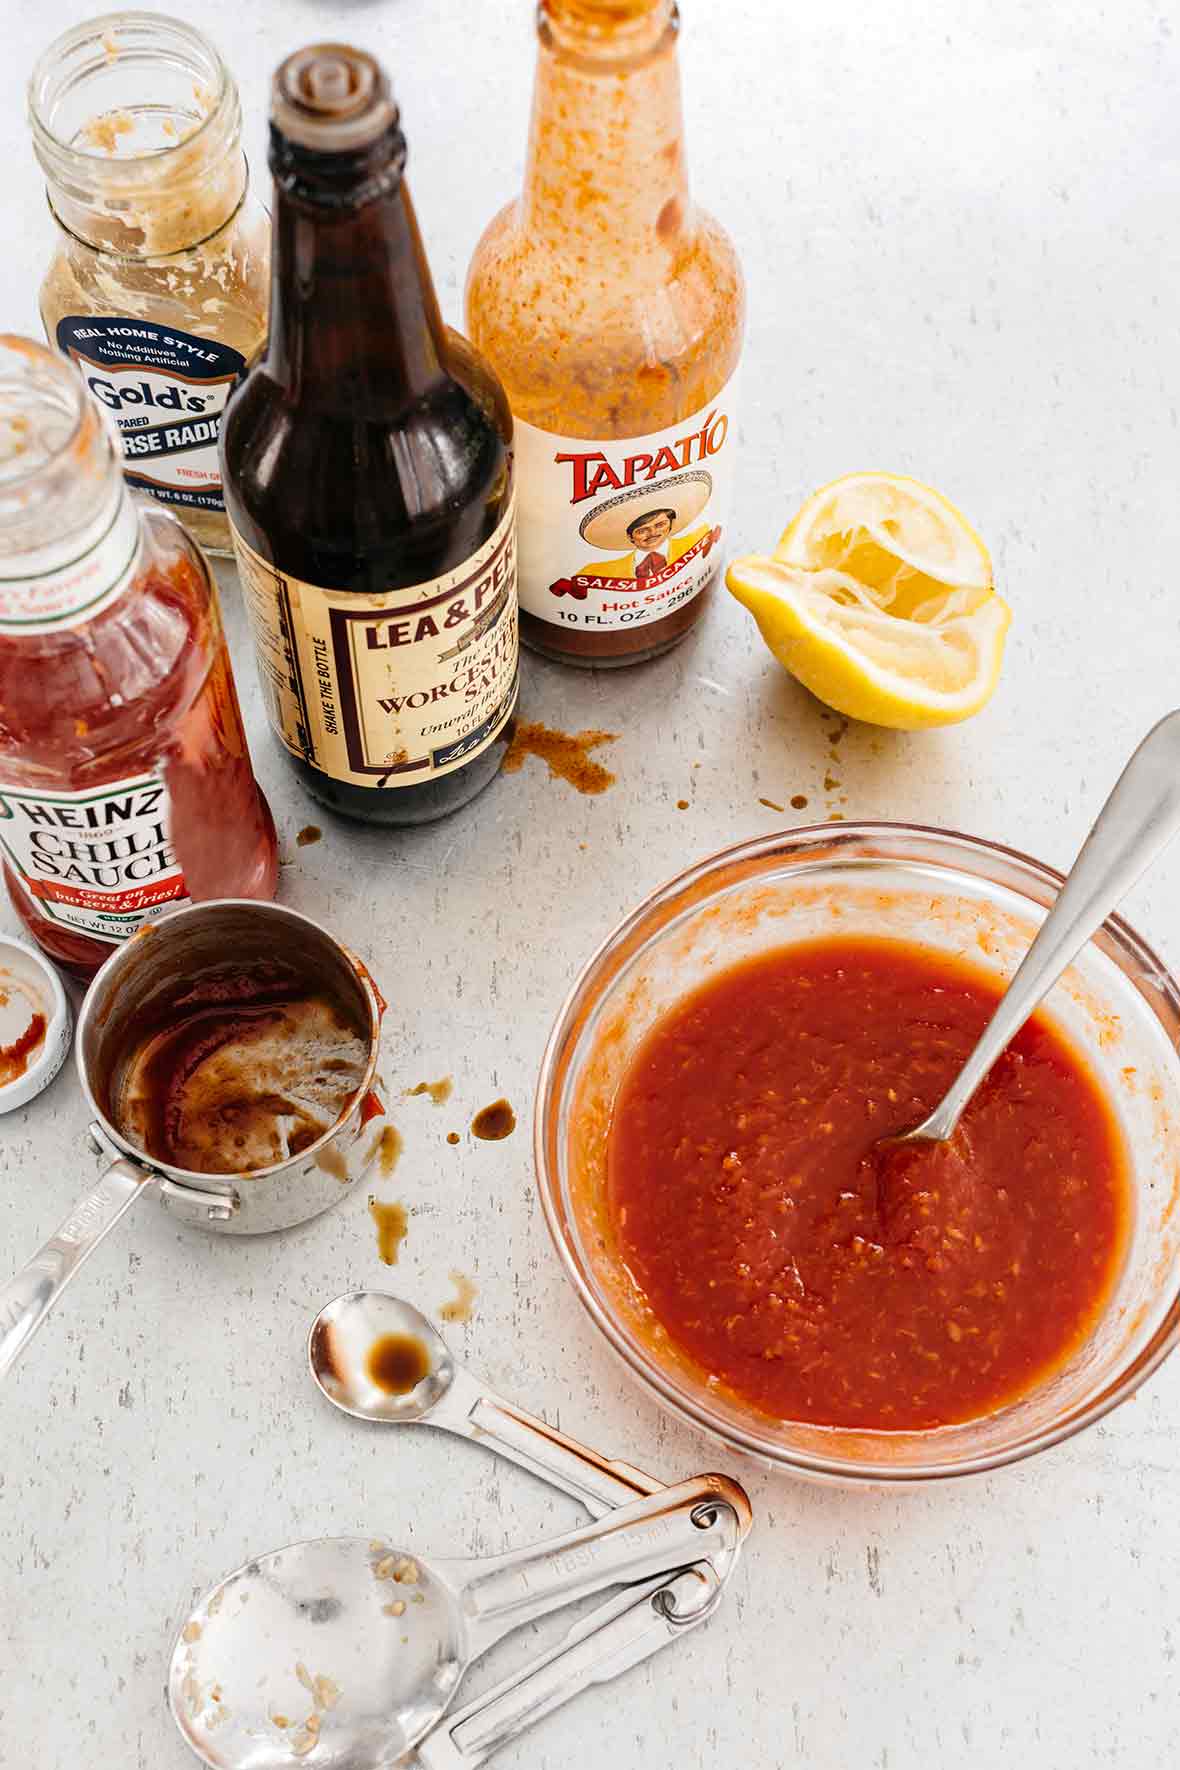 A glass bowl of homemade cocktail sauce with a spoon resting inside and bottles of chili sauce, hot sauce, and Worcestershire sauce in the background.